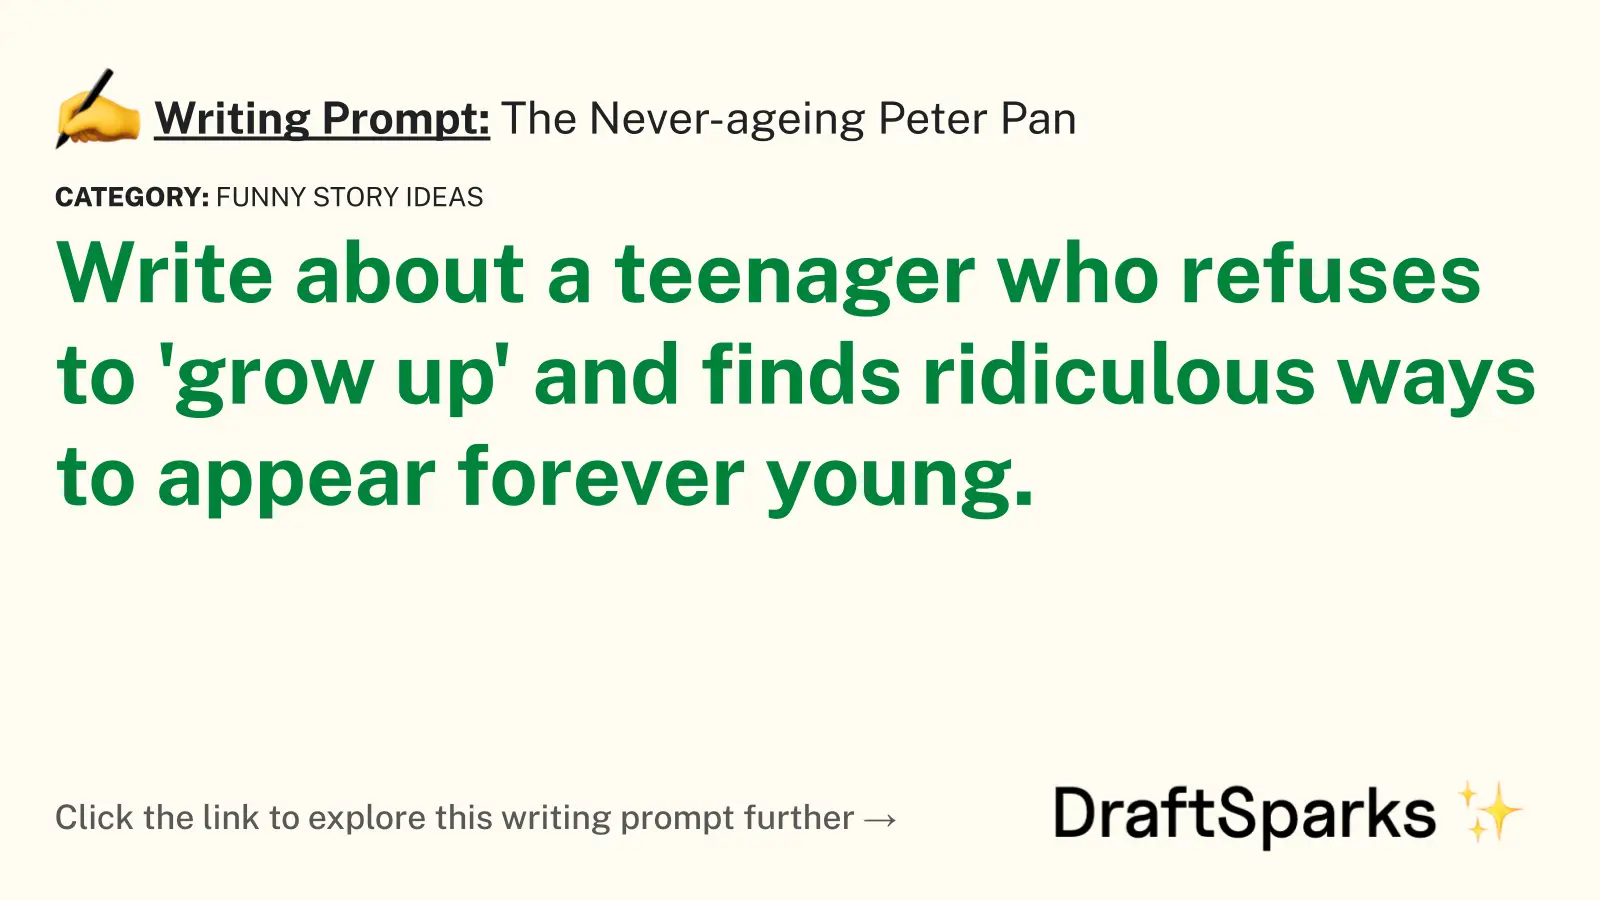 The Never-ageing Peter Pan